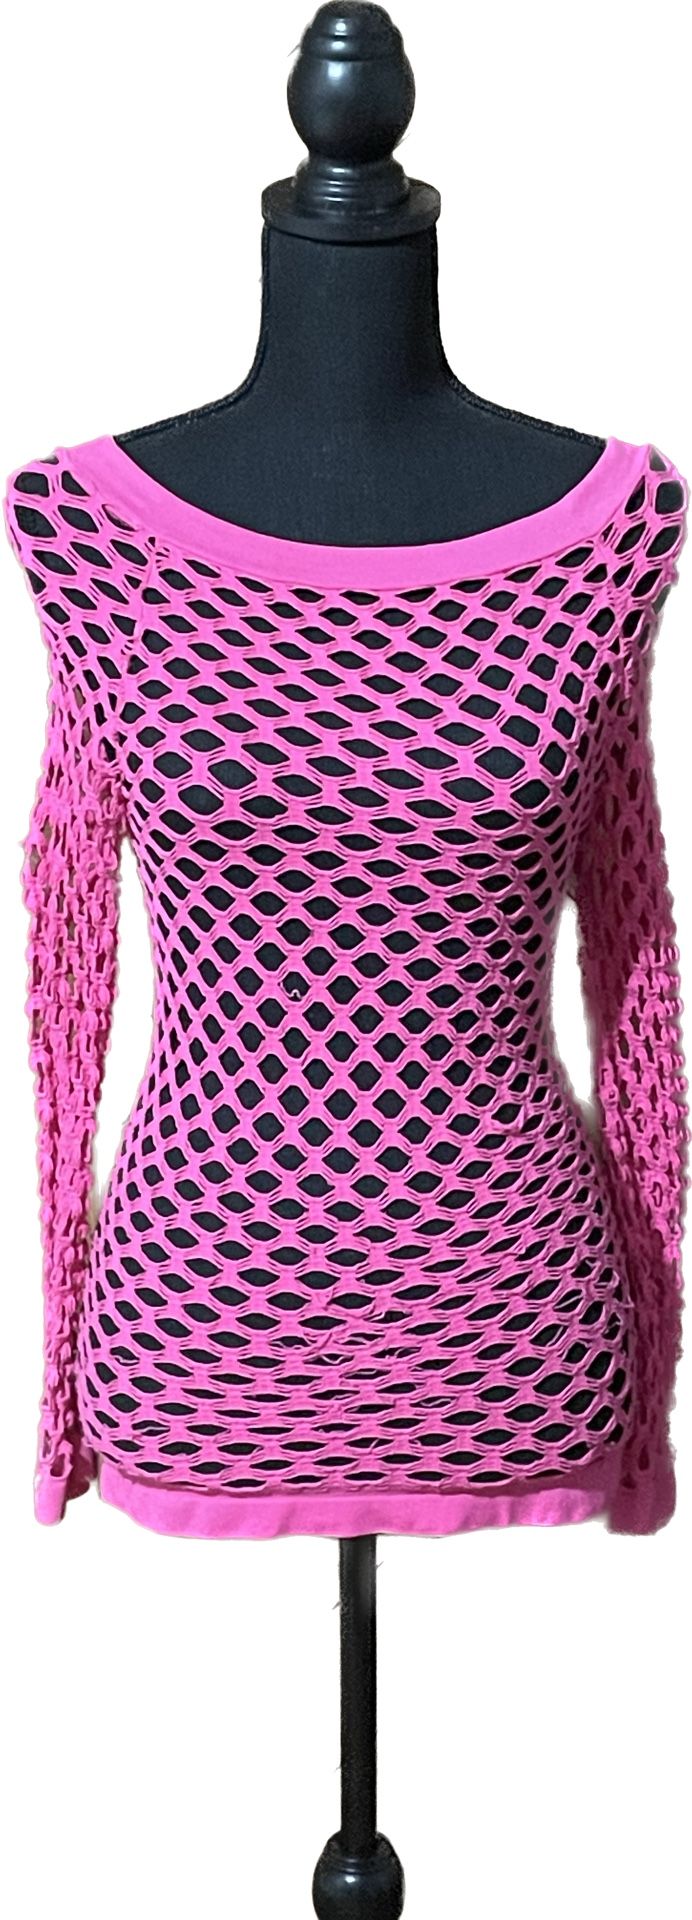 Like New Hot Pink Fishnet Top, Size S